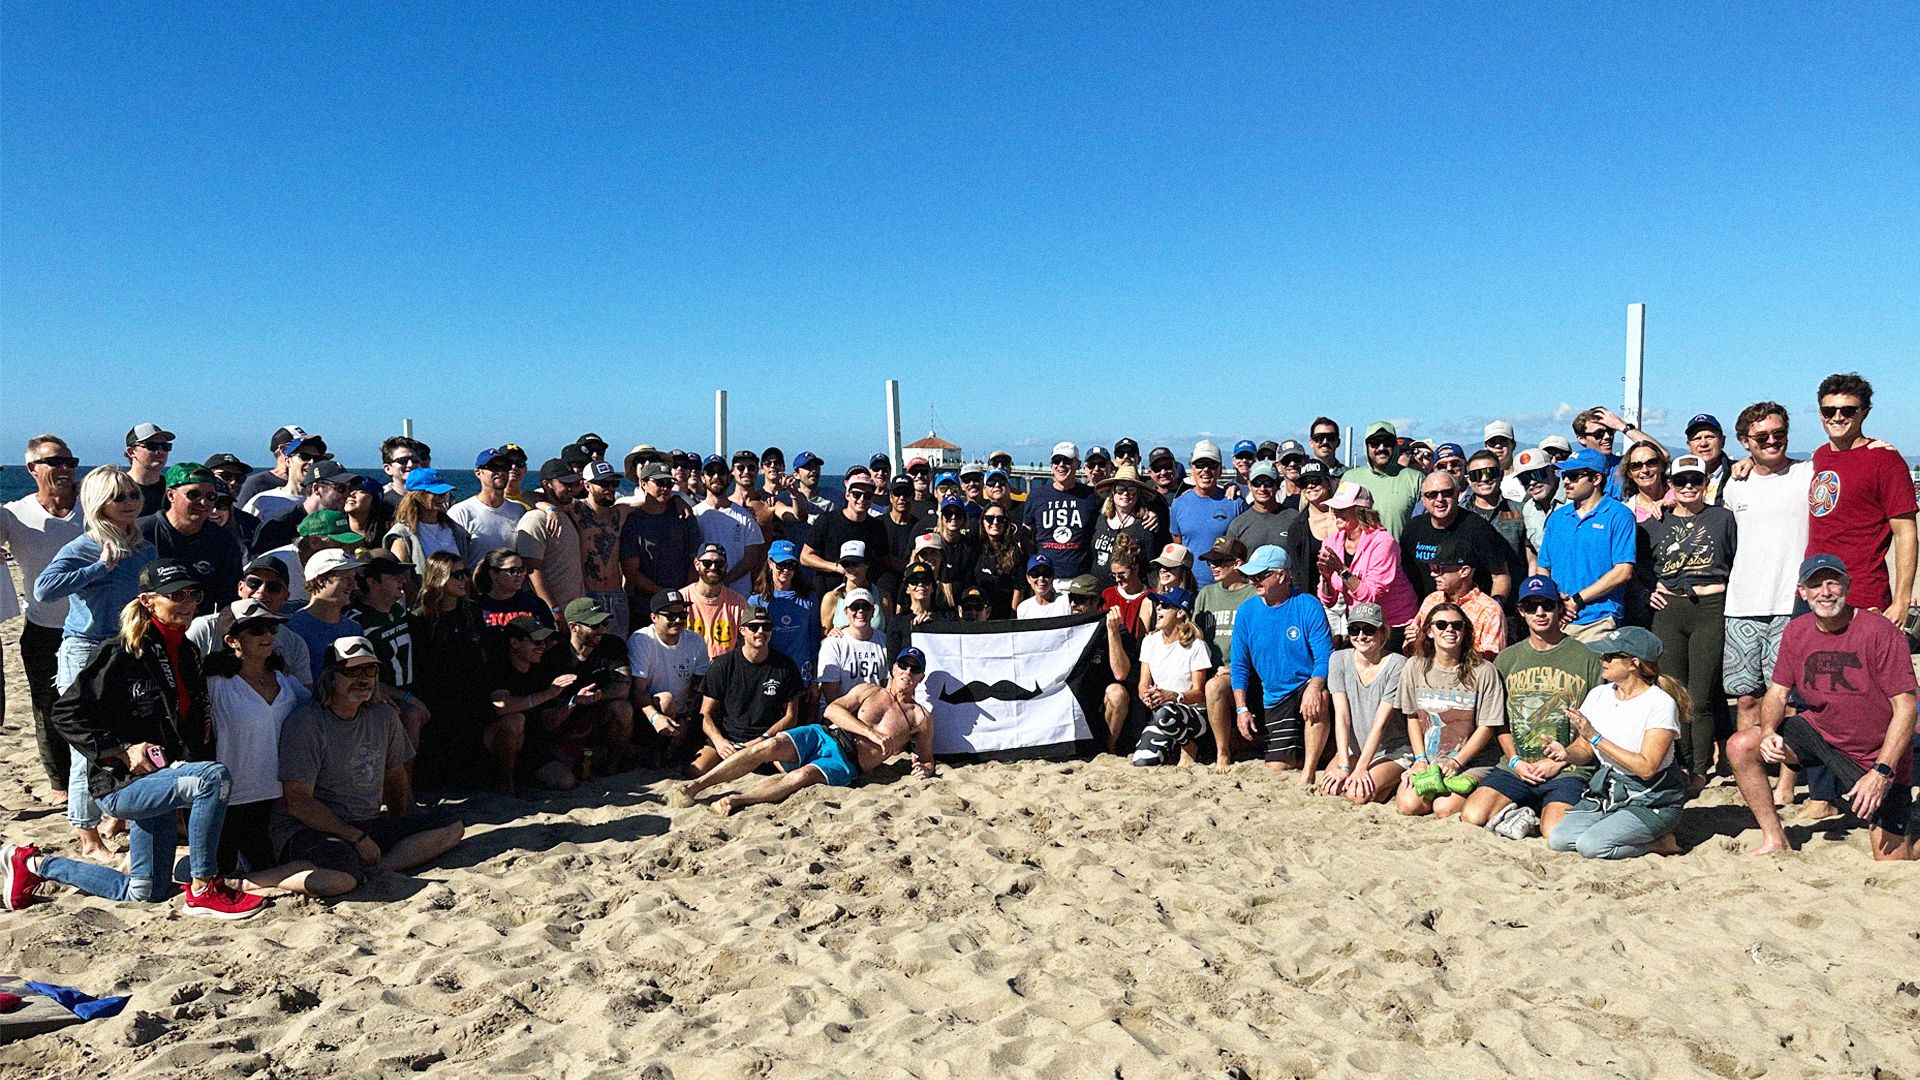 Photo of a crowd posing for a photo at a beach, holding a Movember banner.